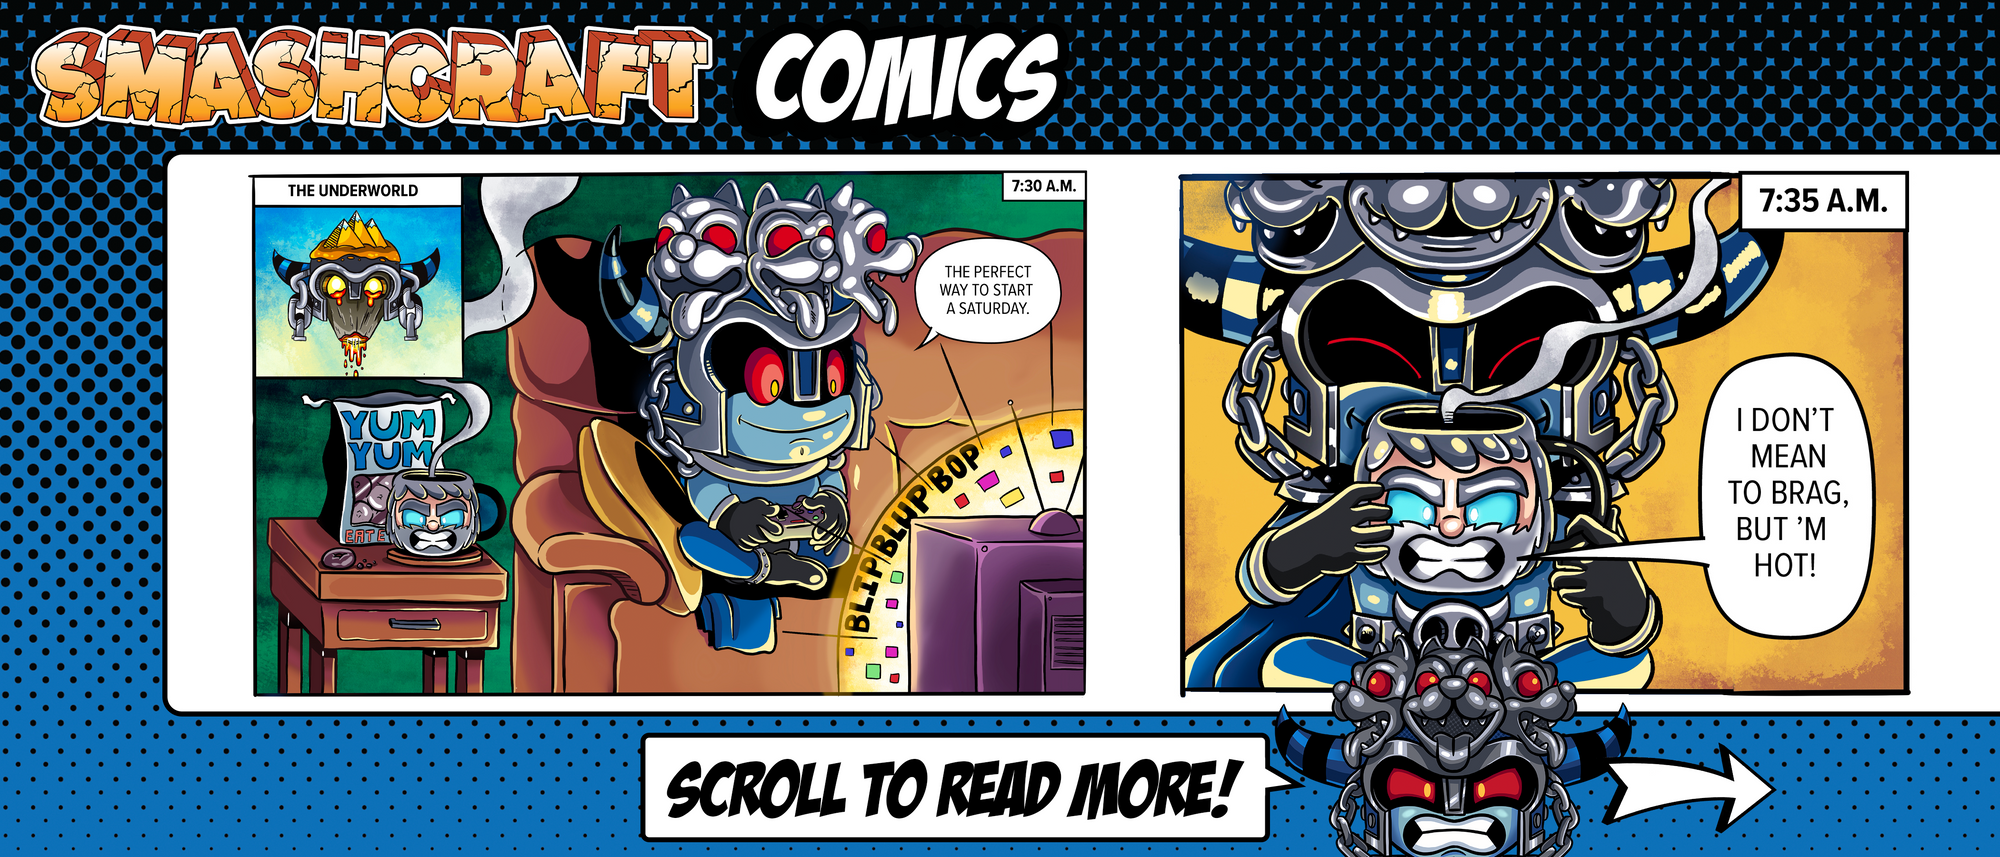 Comic strip showing Hades waking up on a Saturday in the Underworld, he begins at 7:30am by gaming and then drinking out of his hot Zeus coffee mug!